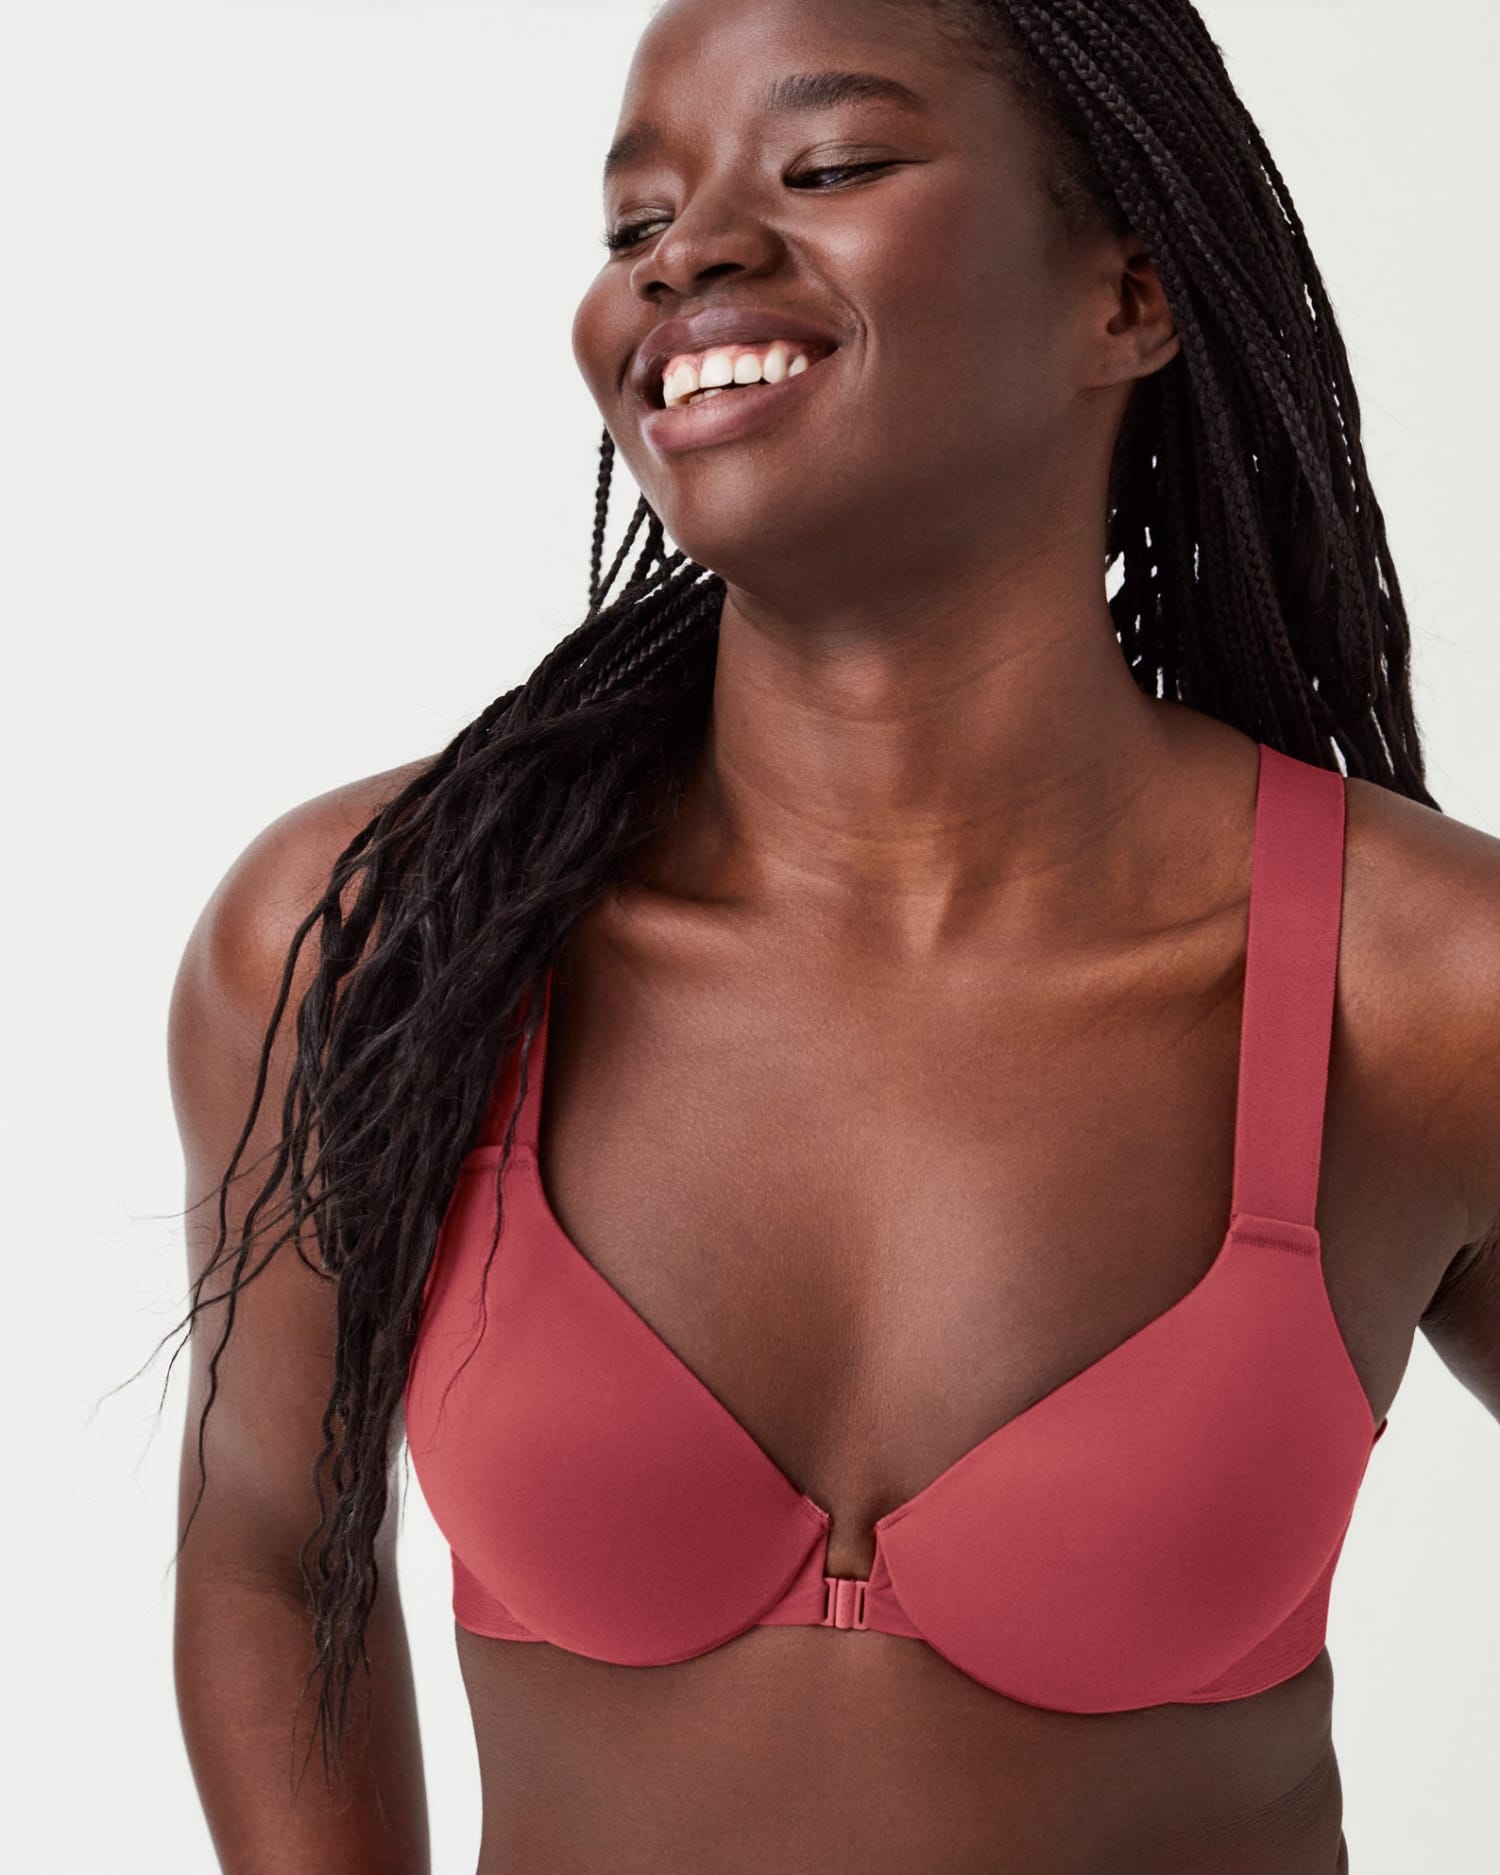 Body Confidence for Spring, Kohl's Intimates